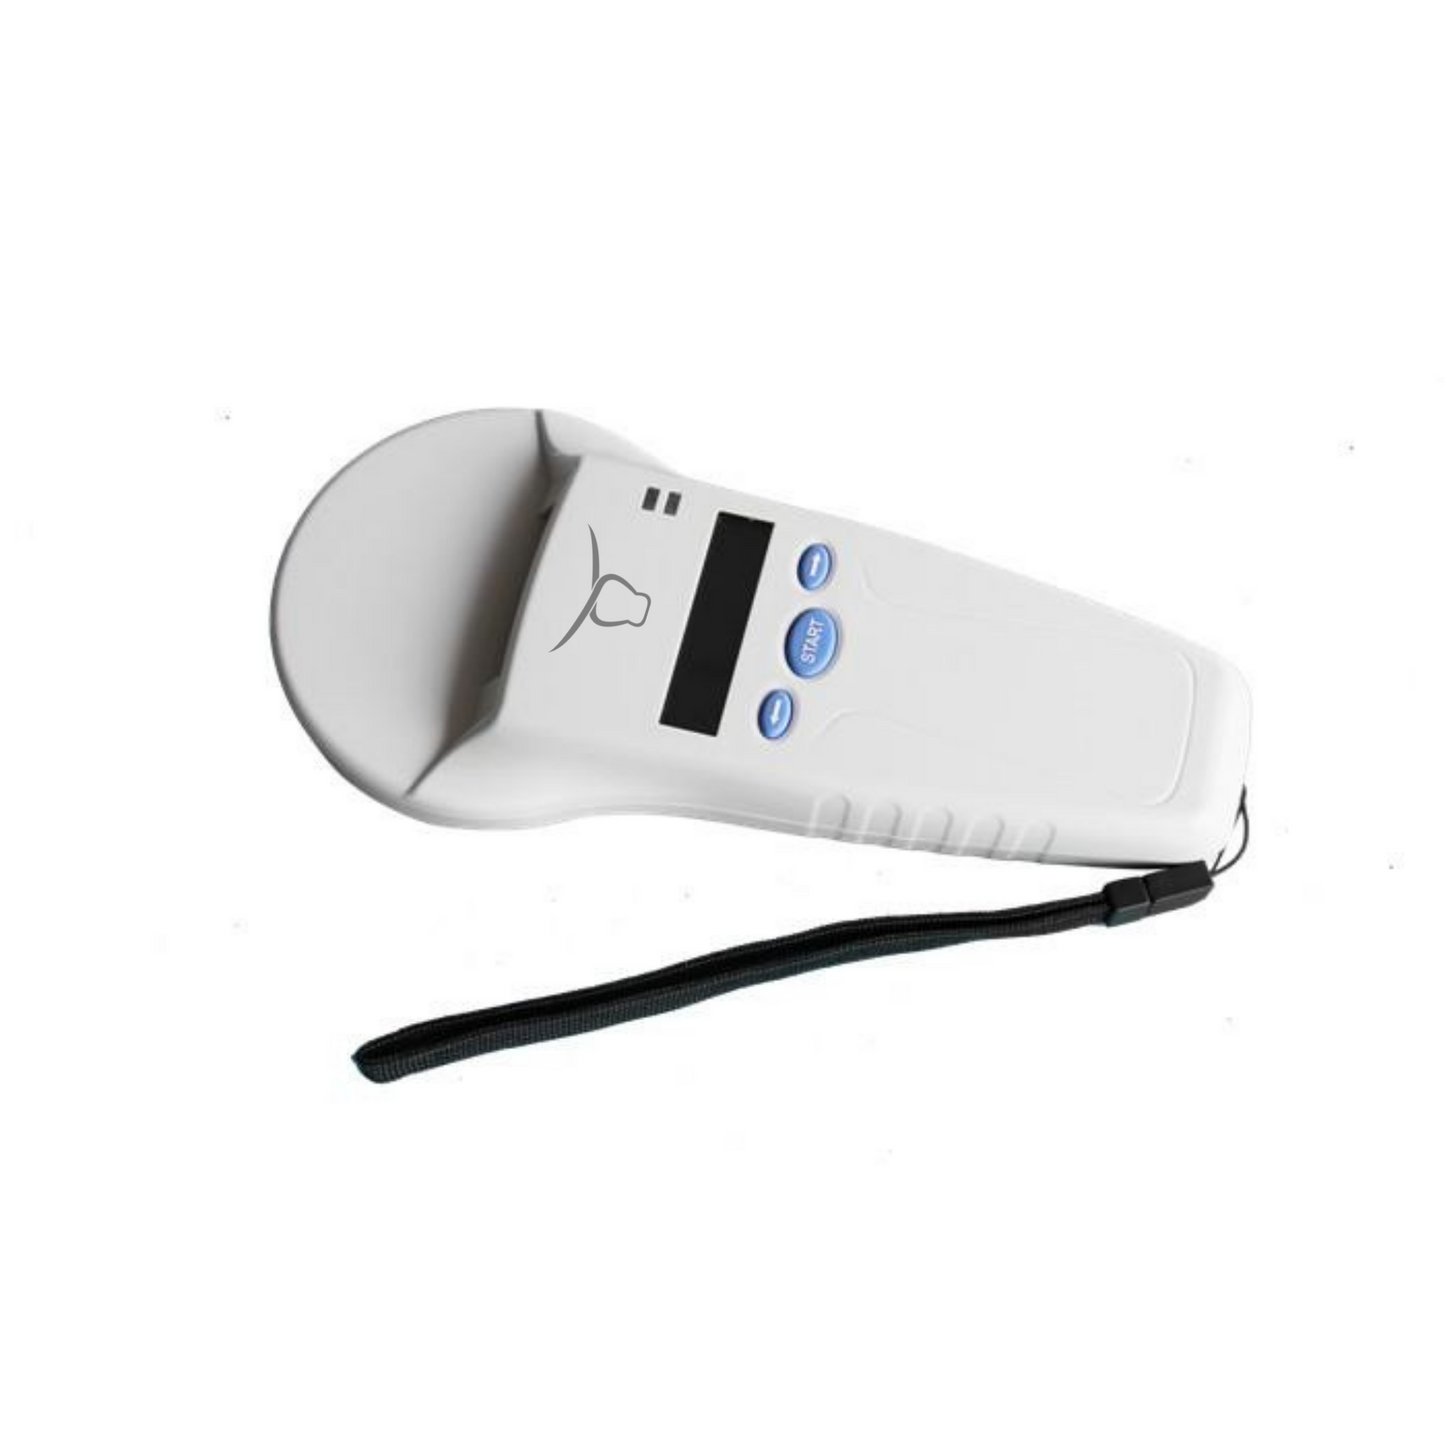 Compact EID Tag Scanner - 7,000 Records